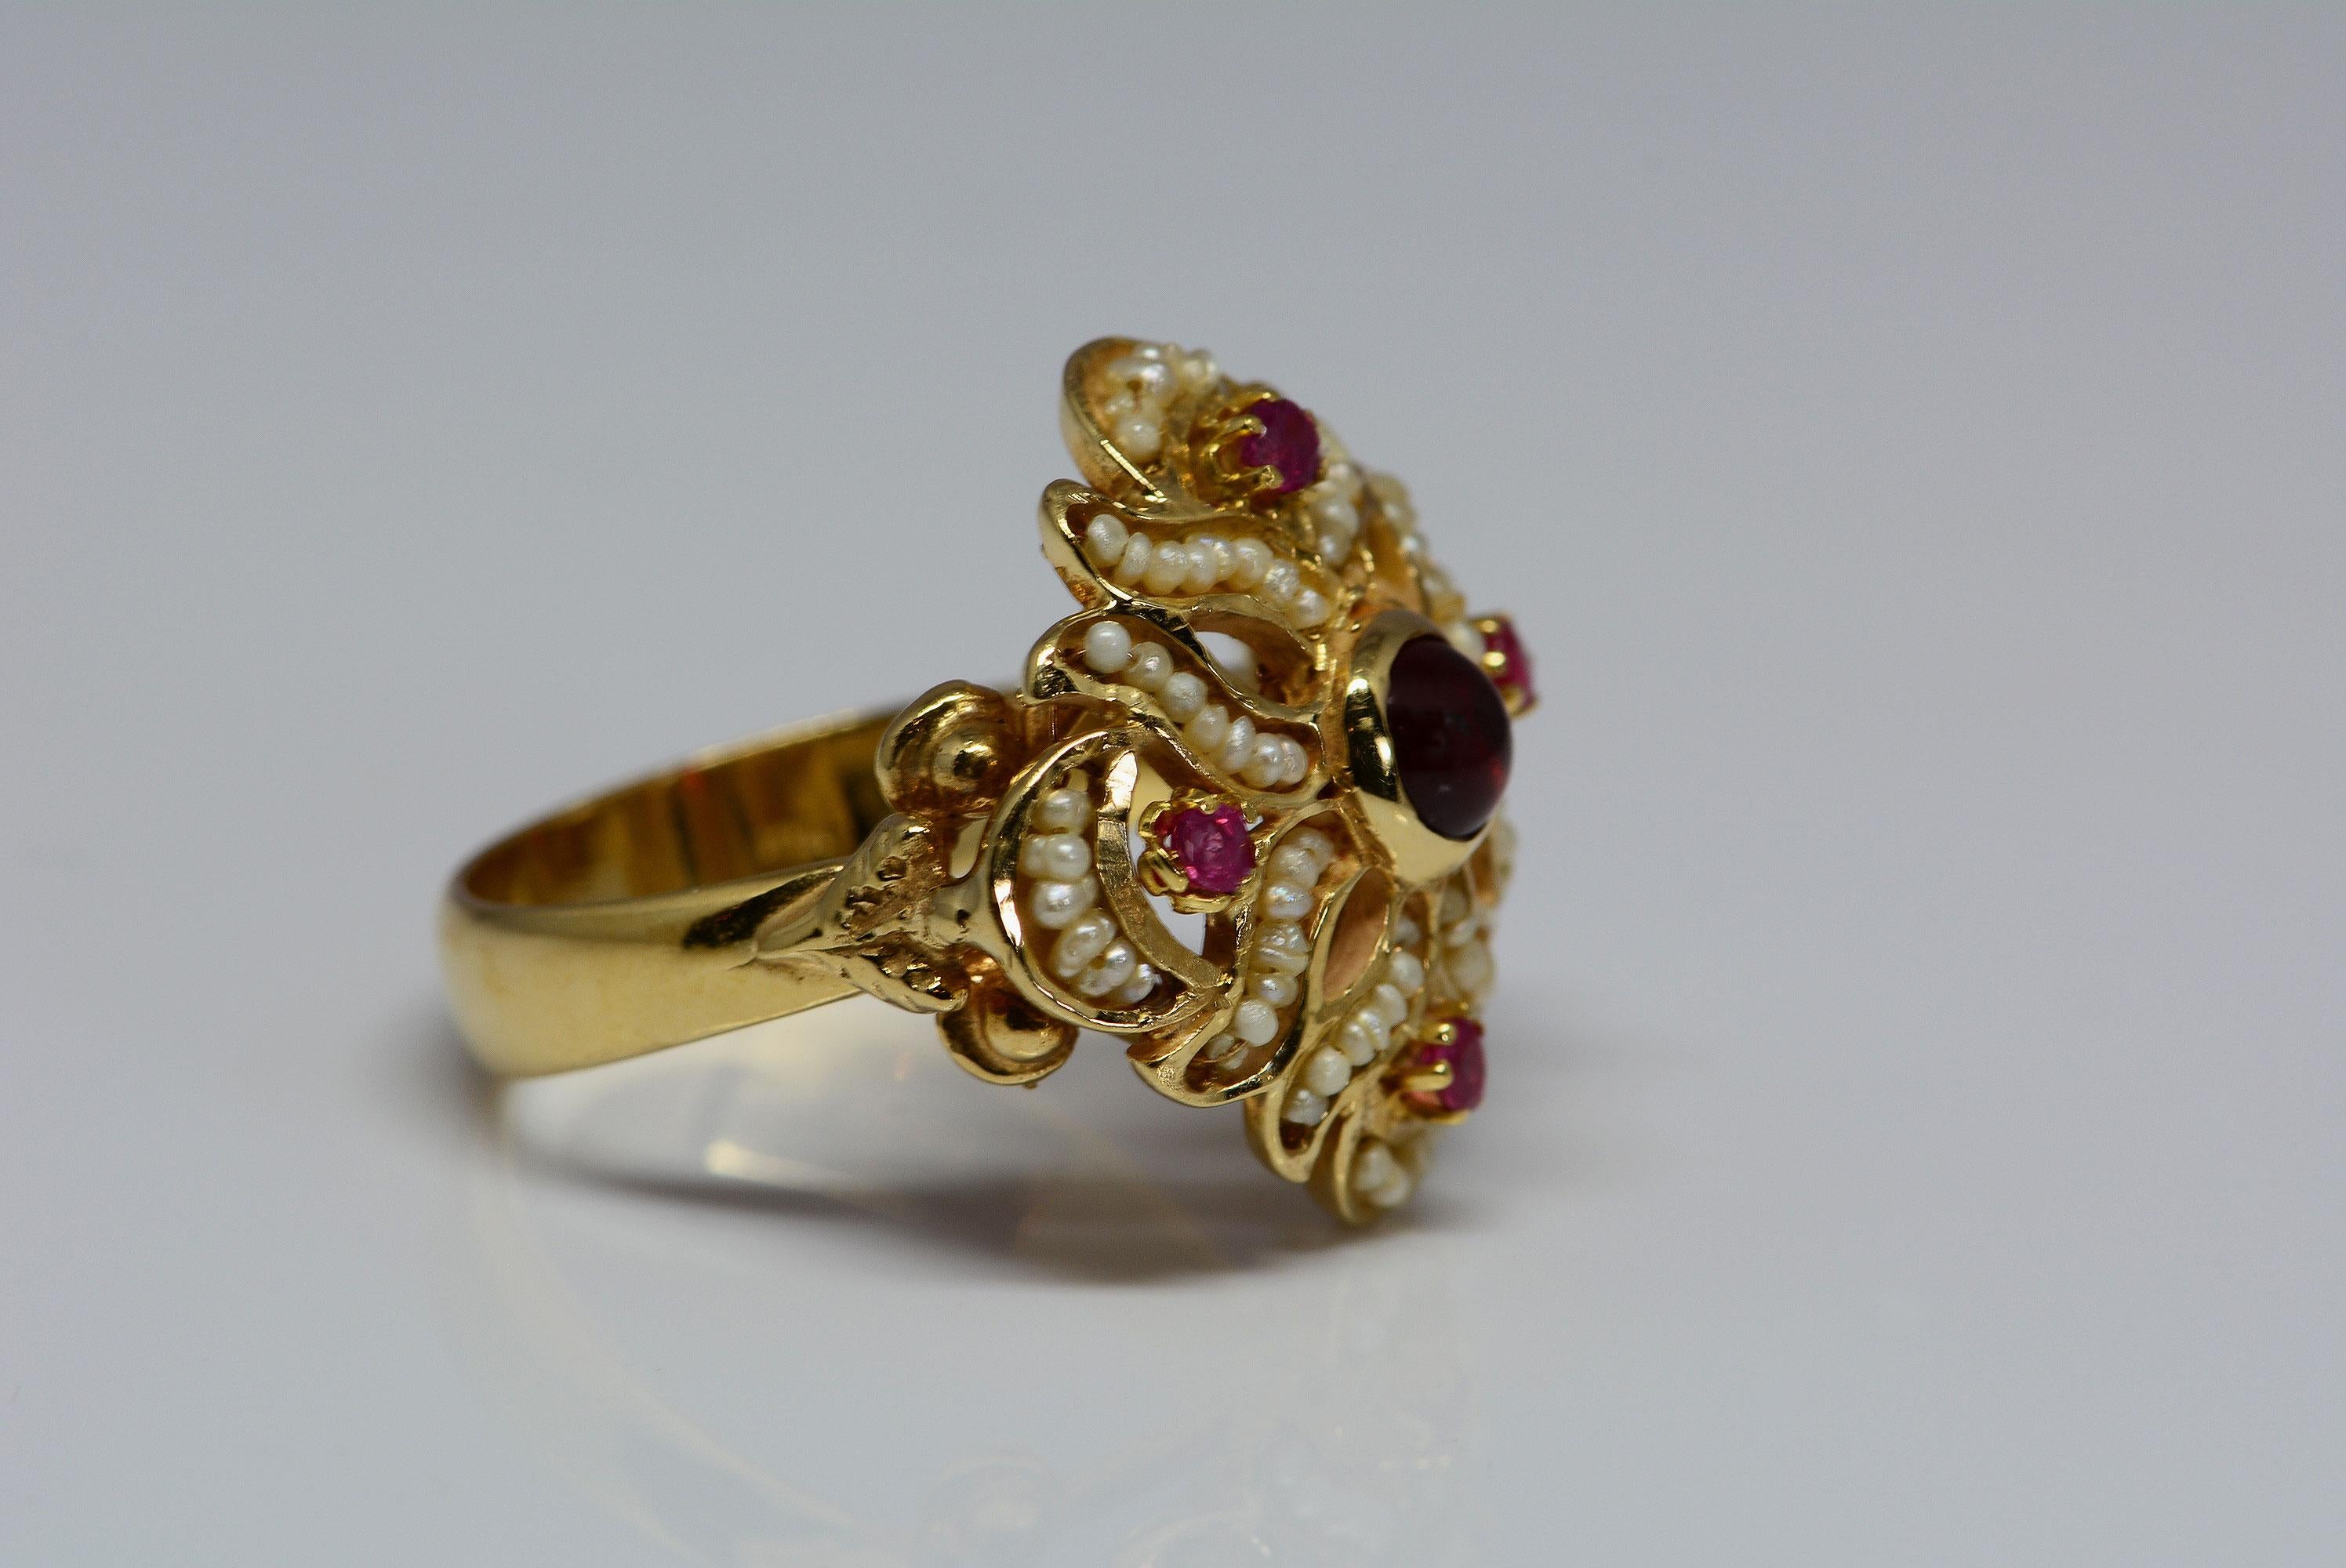 
This ring reminds us of something you would see in the tudor time period, with the combination of the red rubies, cabochon cut garnet, and seed pearls.
The ring was handmade in Italy and is made from 14 karat yellow gold.

The center gem in this